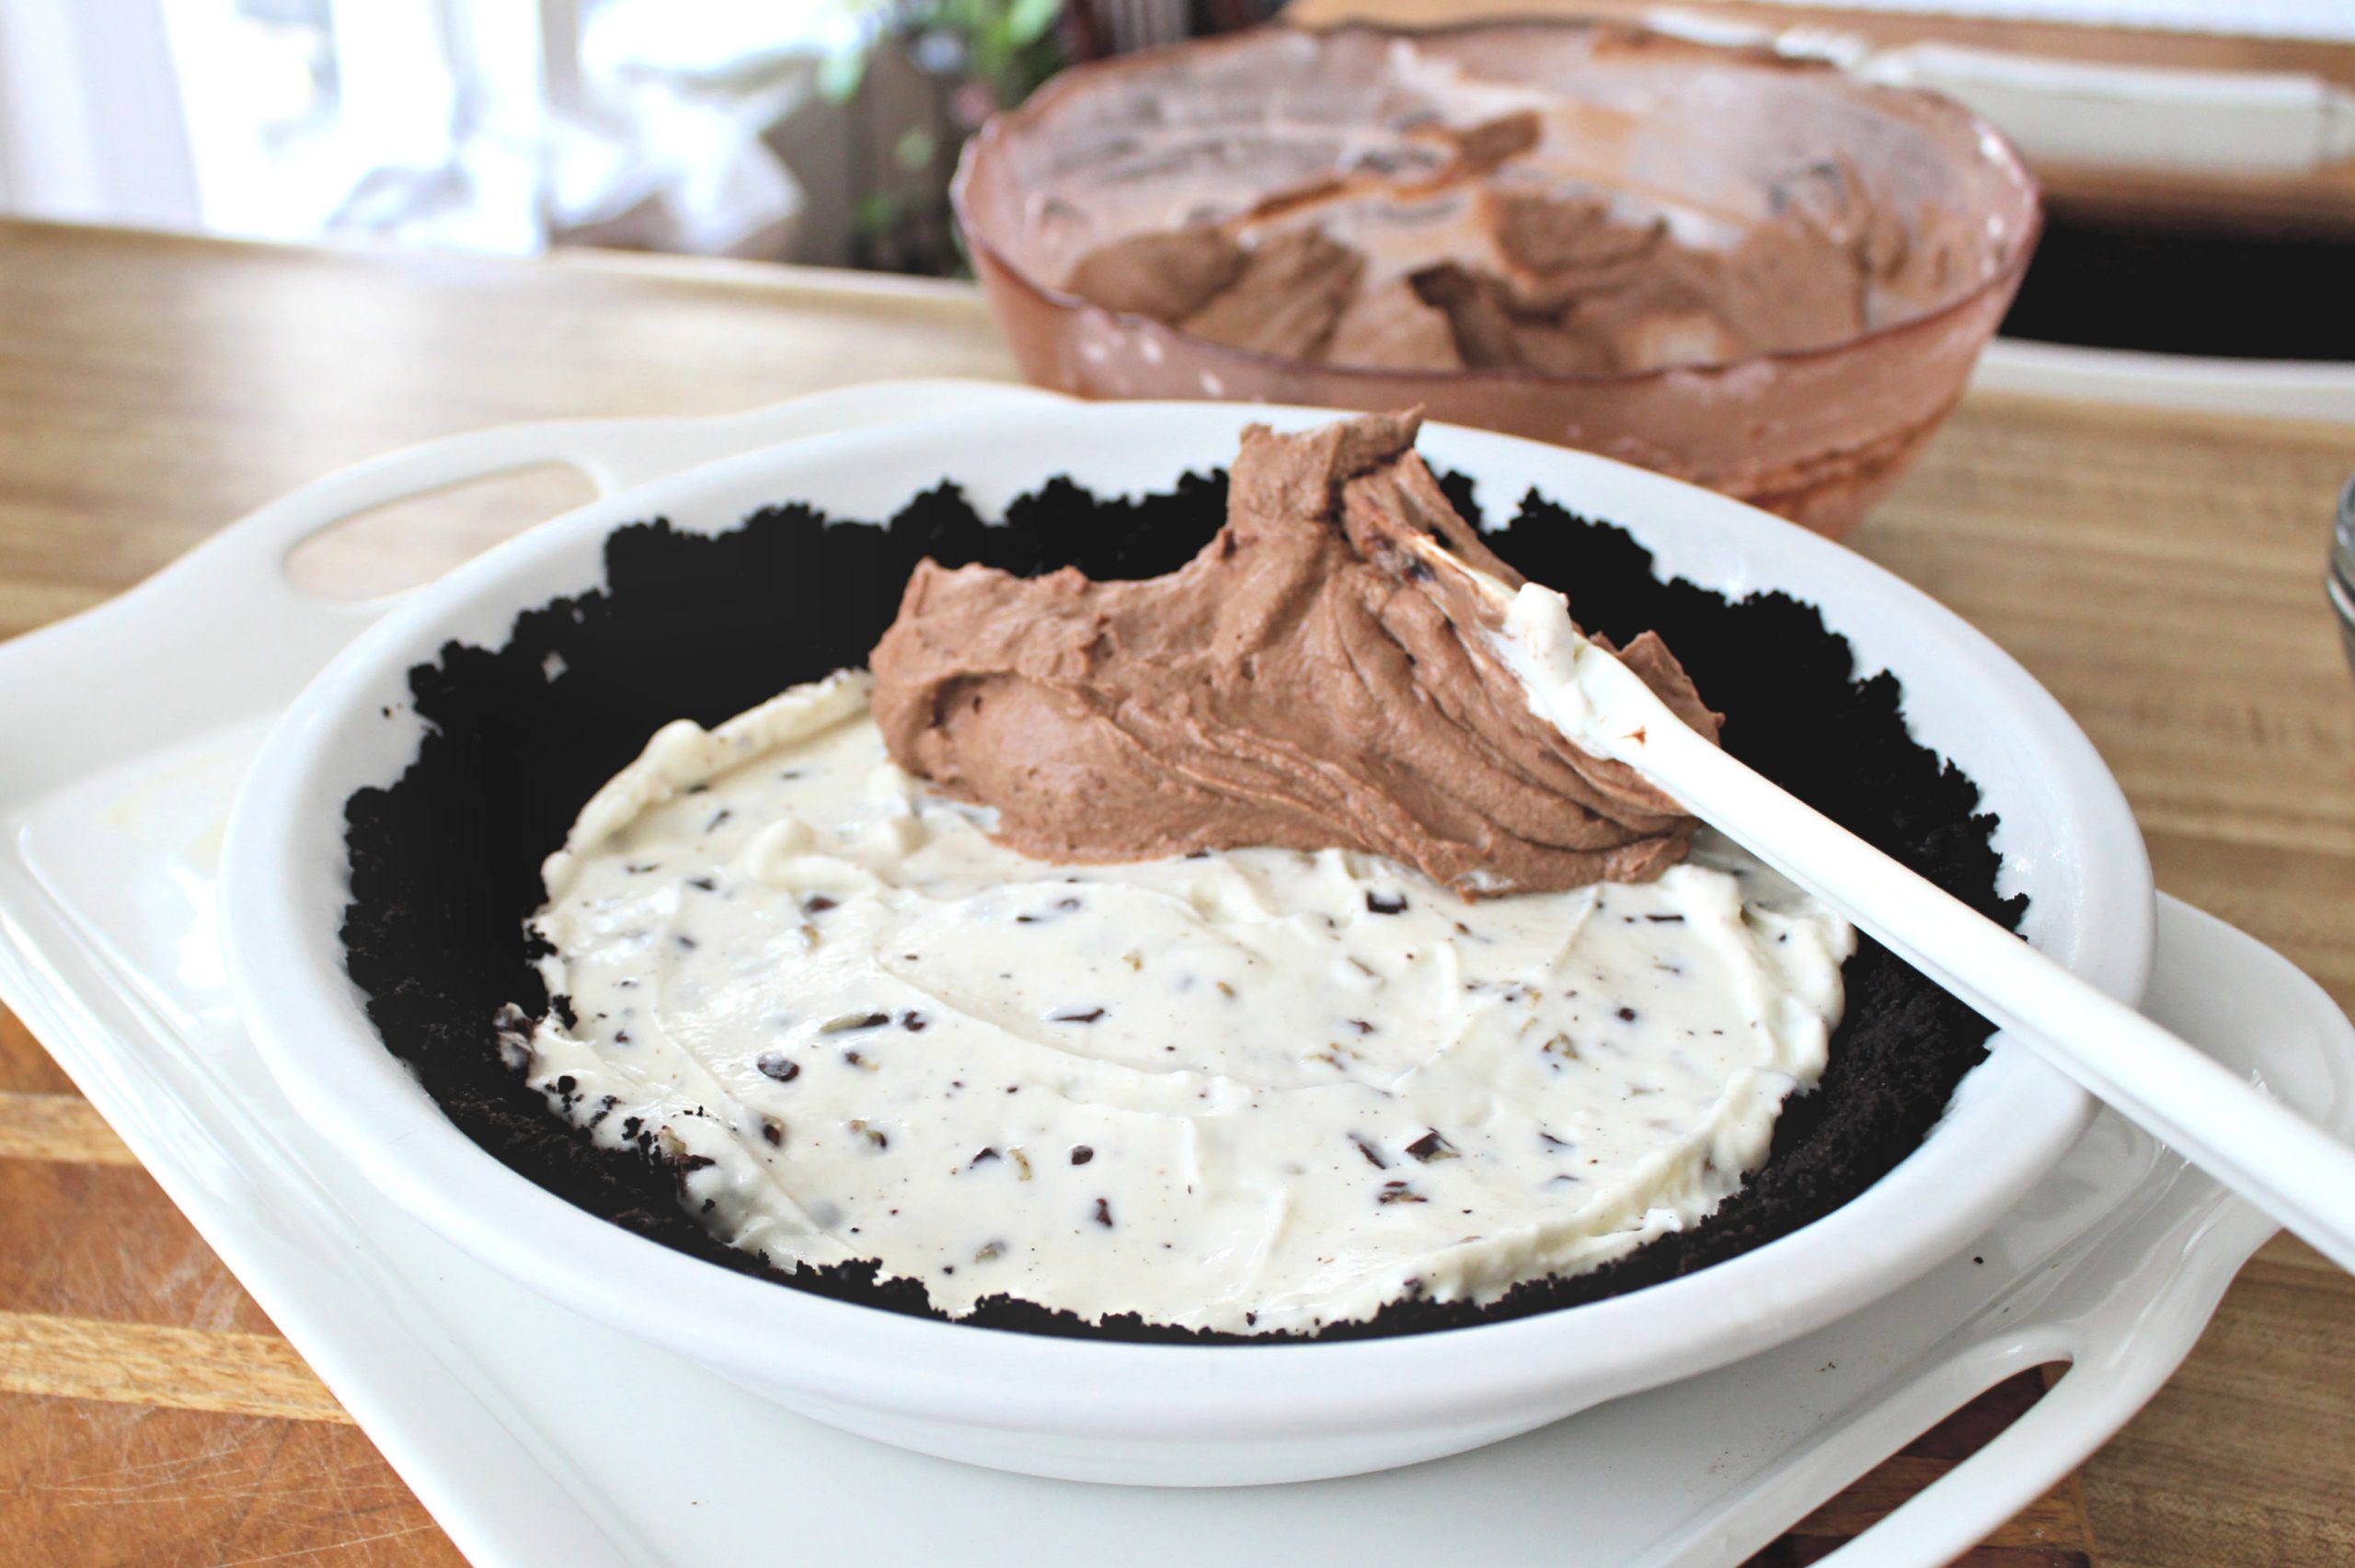 Easy recipe for frozen minty mousse pie with a layers of ice cream, chocolate mousse and whipped cream in a cookie crust is just right for St Patrick's Day